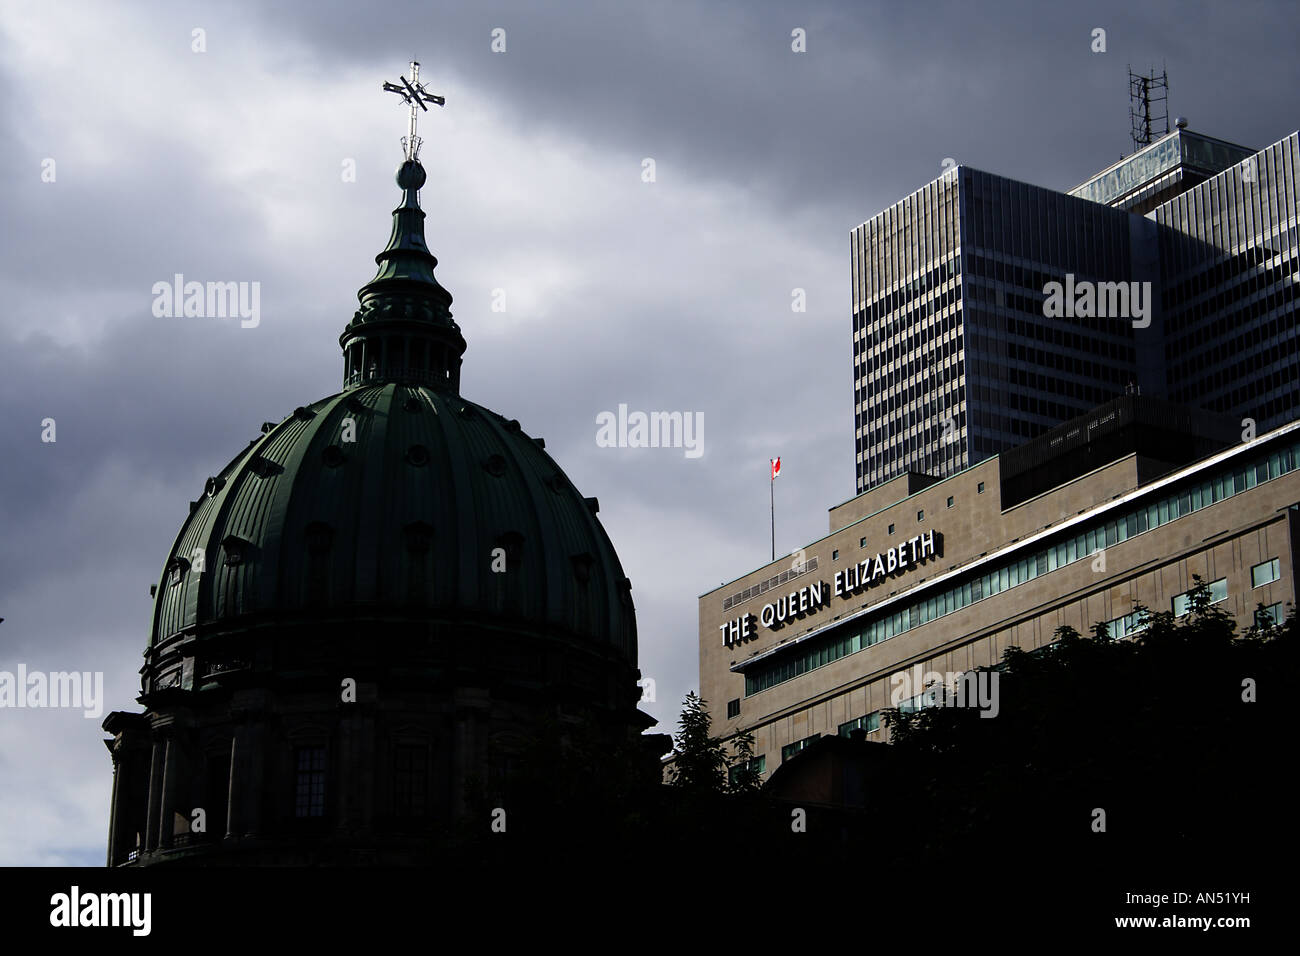 The dome of a catholic church in Montreal Canada with the Queen Elizabeth Hotel behind it Stock Photo